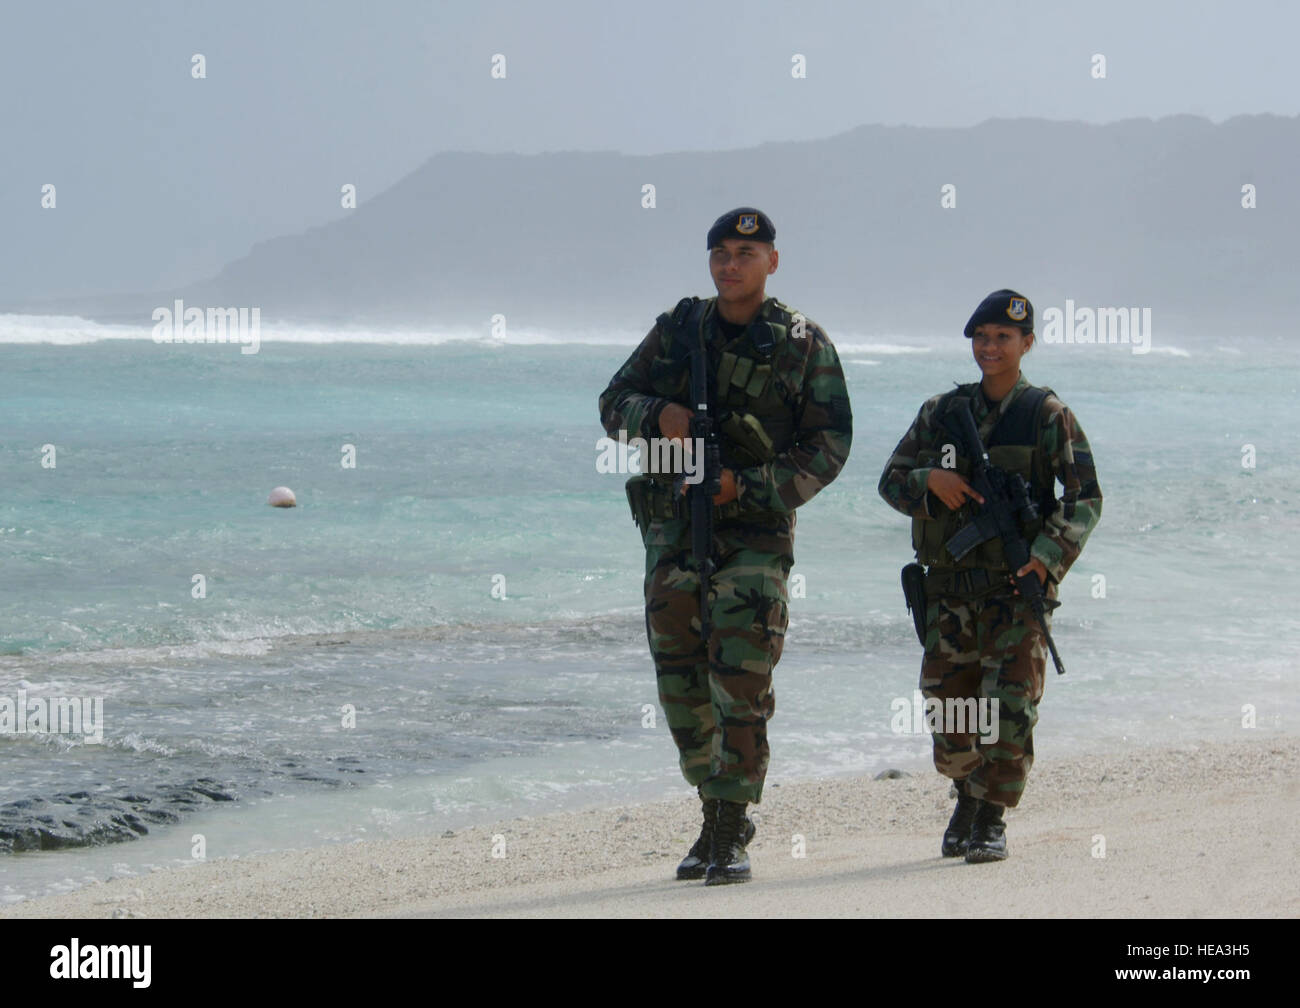 ANDERSEN AIR FORCE BASE, Guam (AFPN) -- Senior Airman Maria Ronquillo and  Staff Sgt. Michael Quitugua patrol Tarague Beach here. Both Airmen are  assigned to the Guam Air National Guard's 254th Security